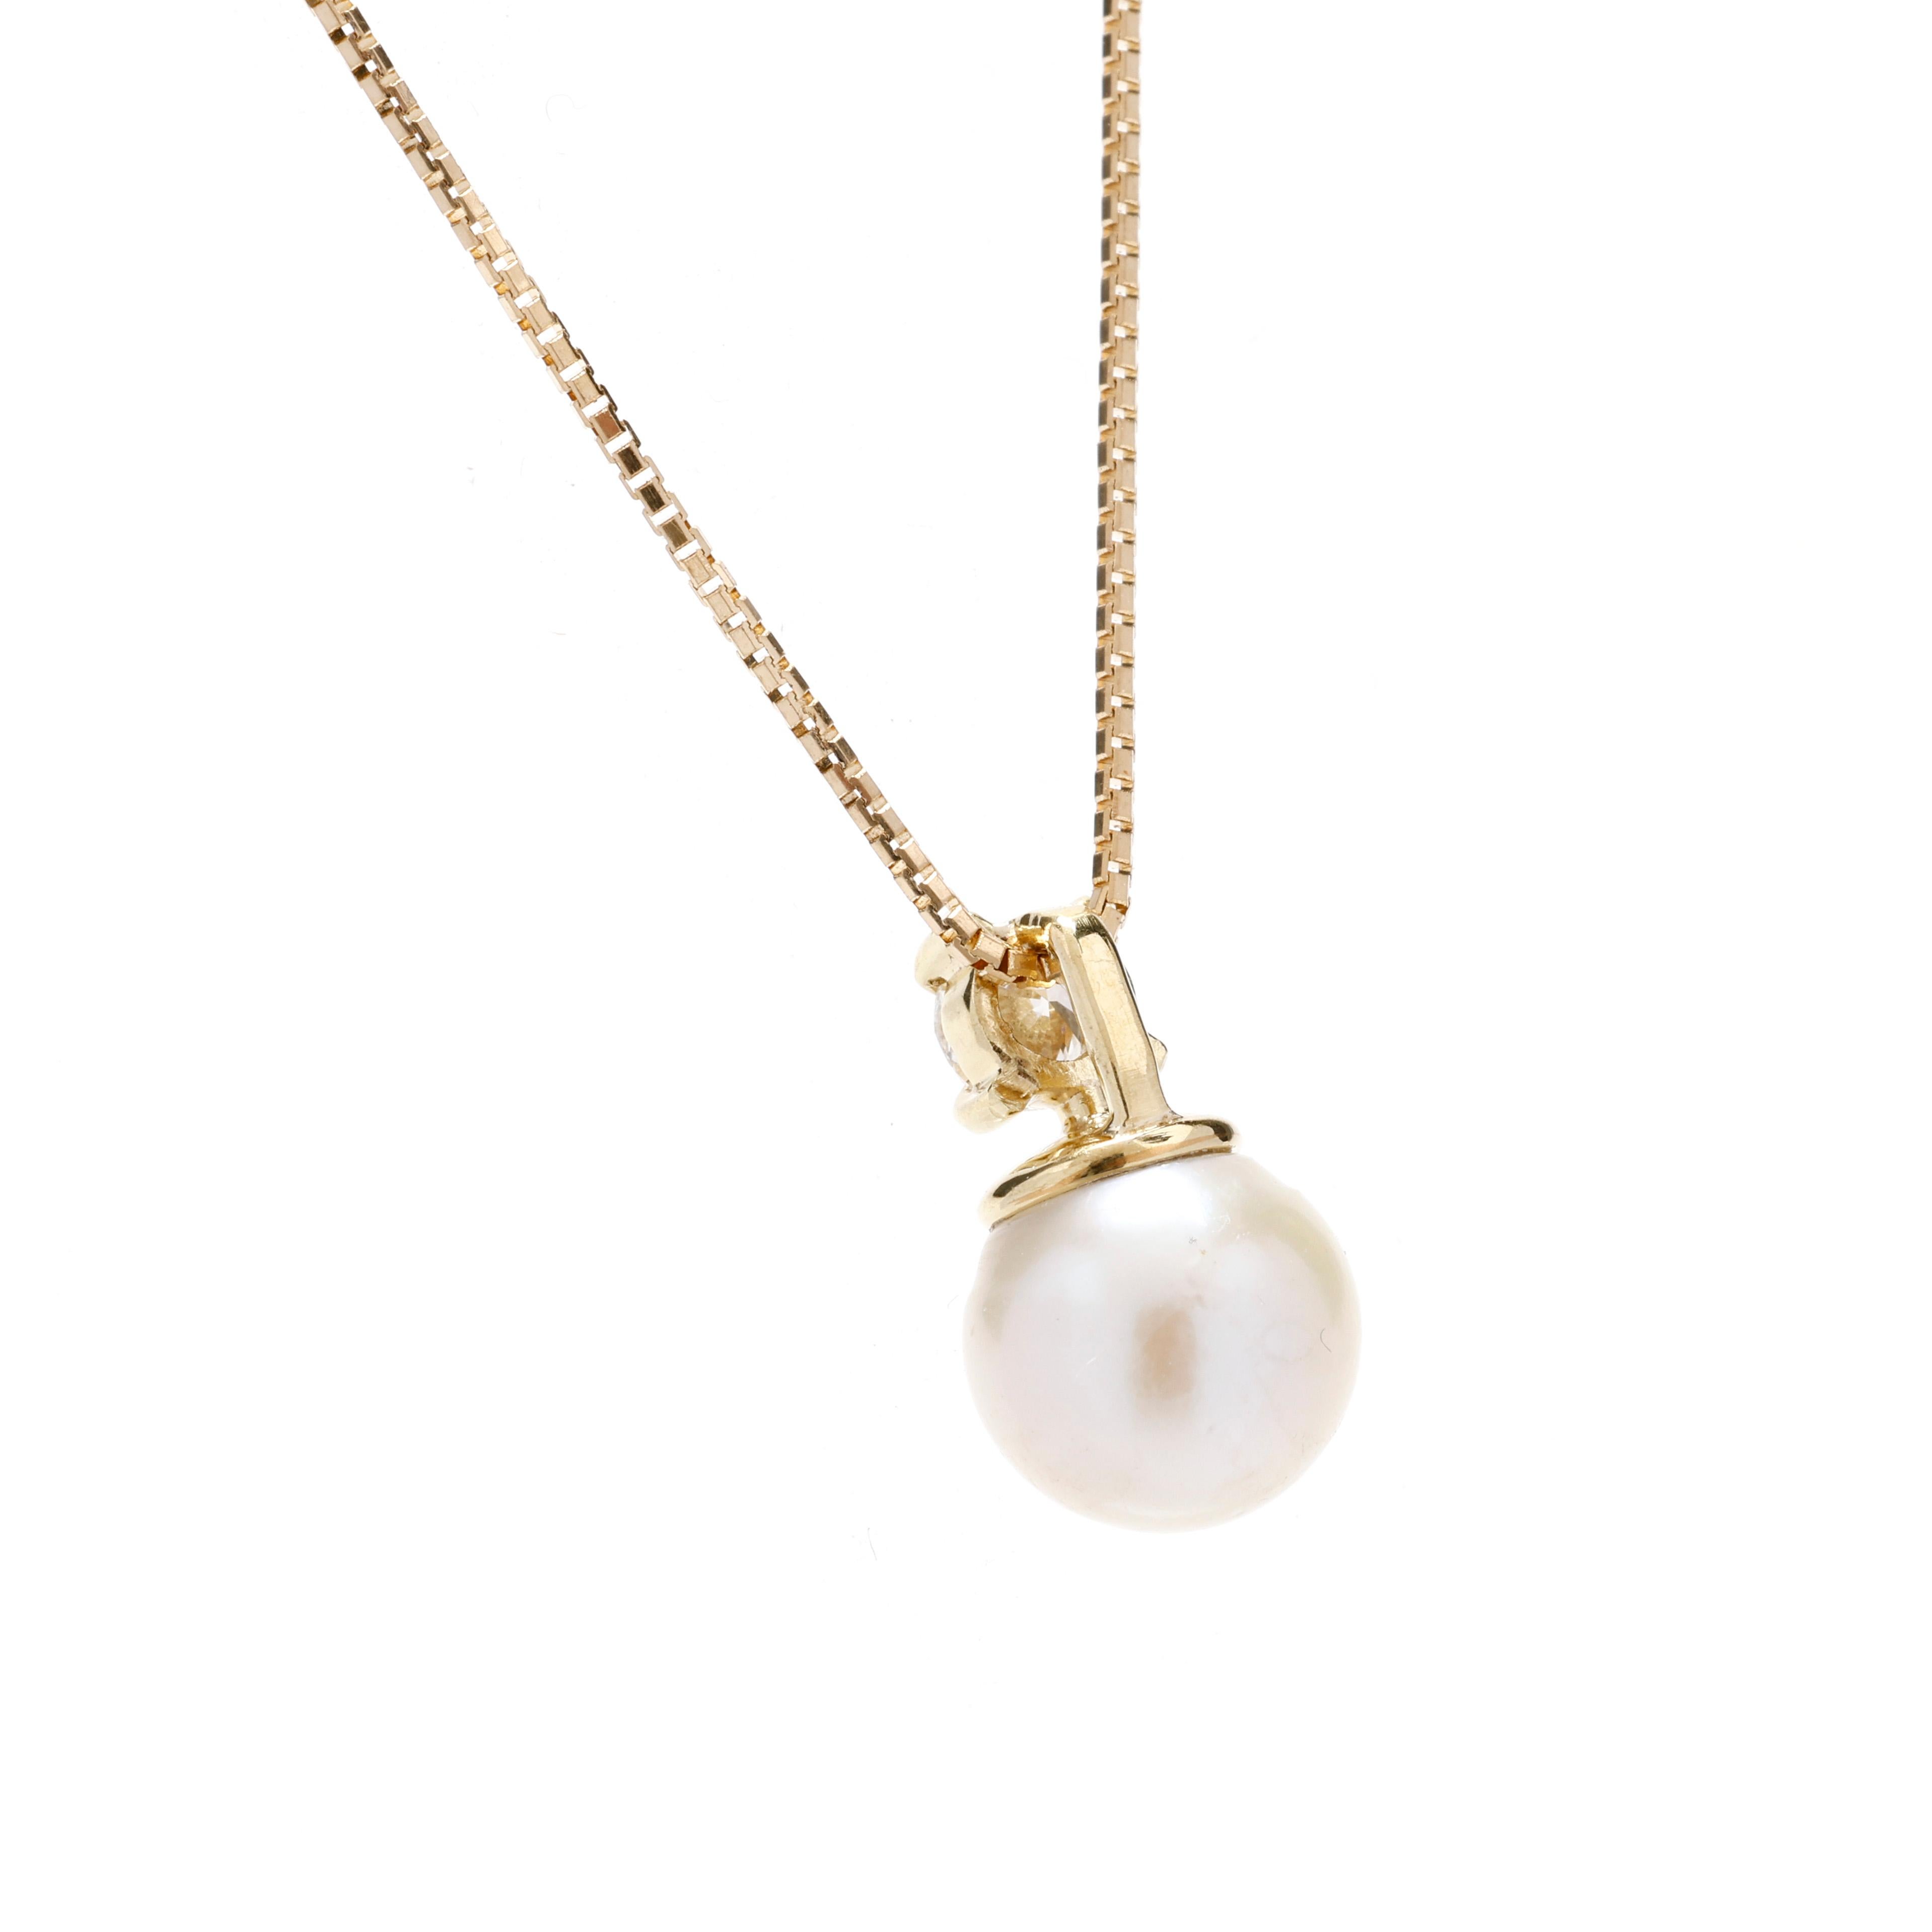 Elevate your elegance with this exquisite 0.15ctw Diamond and Pearl Pendant Necklace. Meticulously crafted in luxurious 18k yellow gold, this stunning necklace features a luminous pearl suspended from a delicate chain, accented by sparkling round